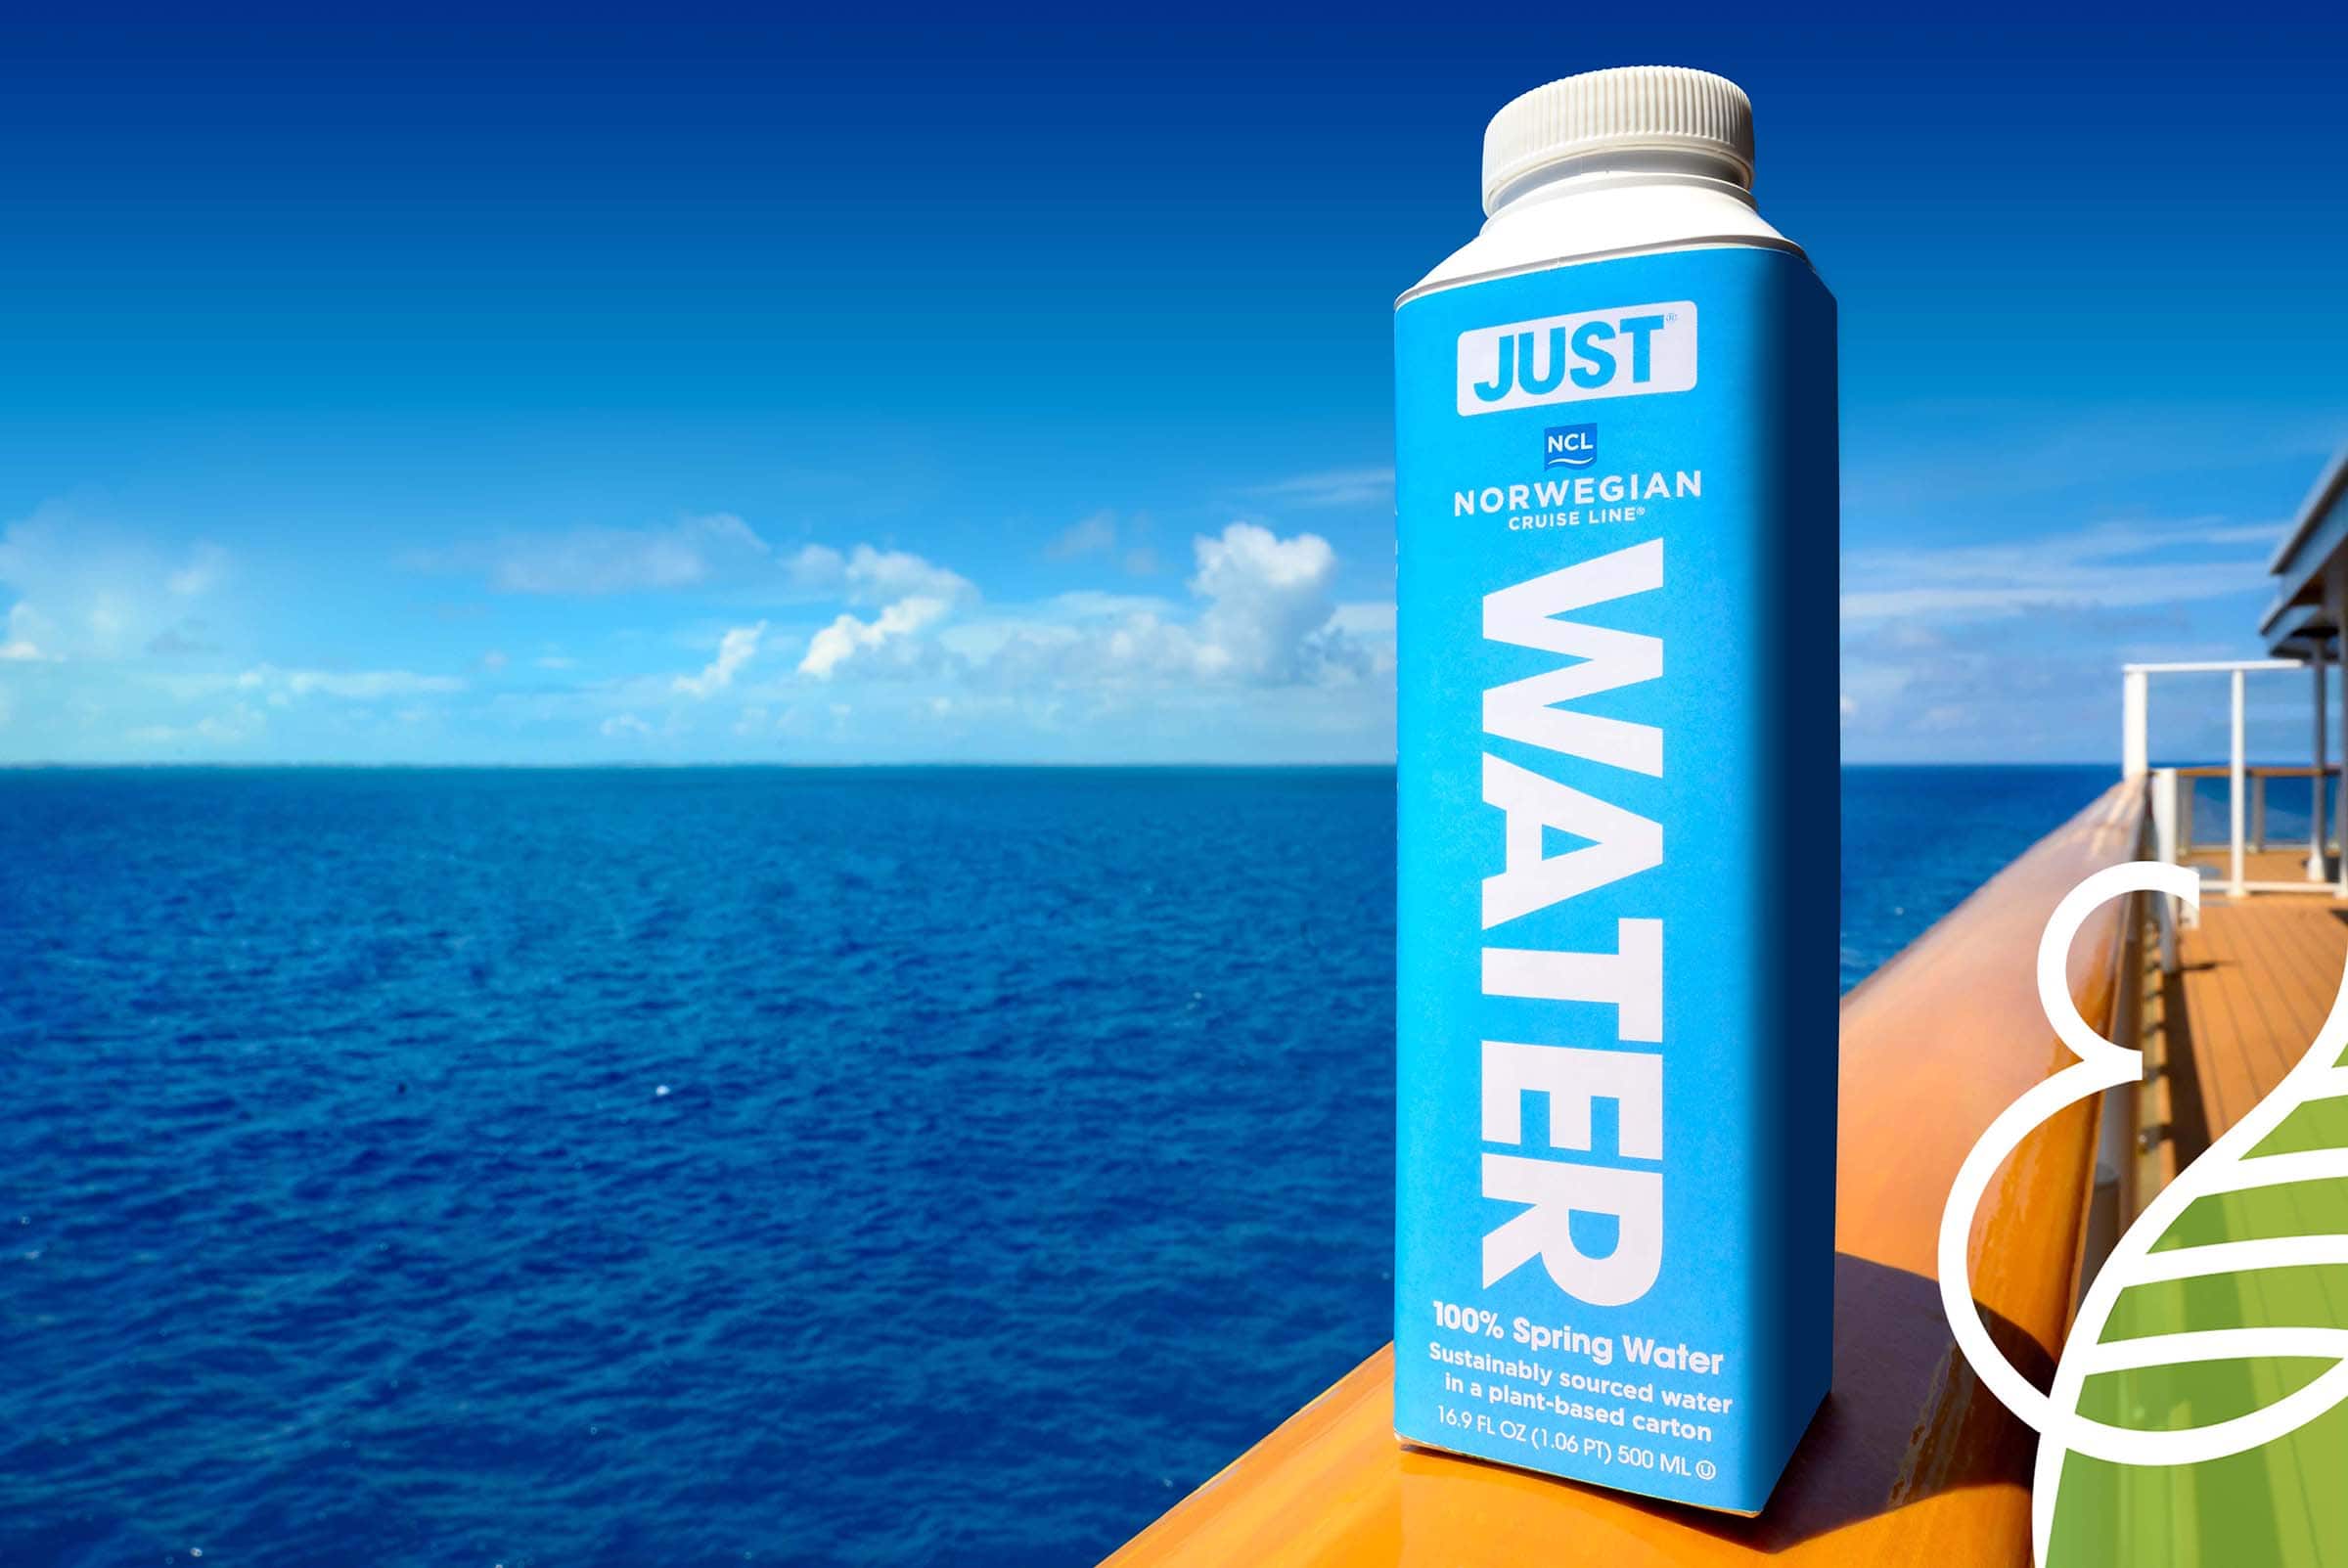 Norwegian Becomes First Major Global Cruise Company to Eliminate Single-Use Plastic  Bottles